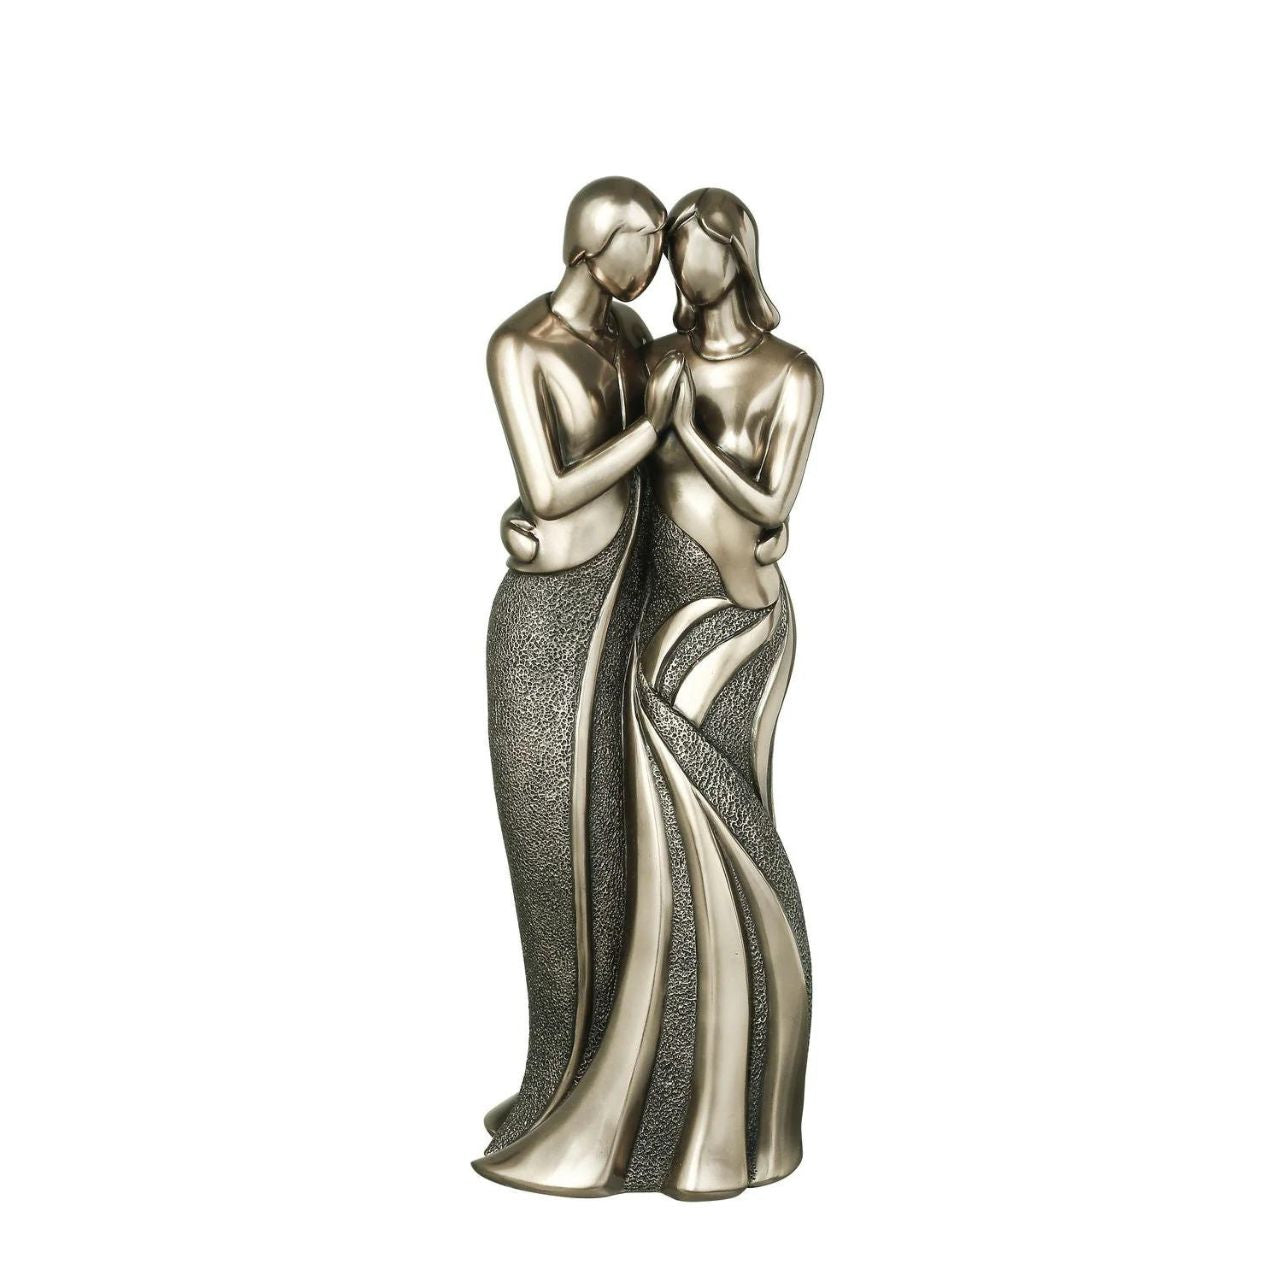 Forever Love by Genesis  Perfect for art lovers or for an occasional gift such as a wedding gift, or an engagement gift.  Genesis Fine Arts has evolved into a much loved and world famous Irish brand to produce a striking range of handcrafted cold cast bronze sculptures.